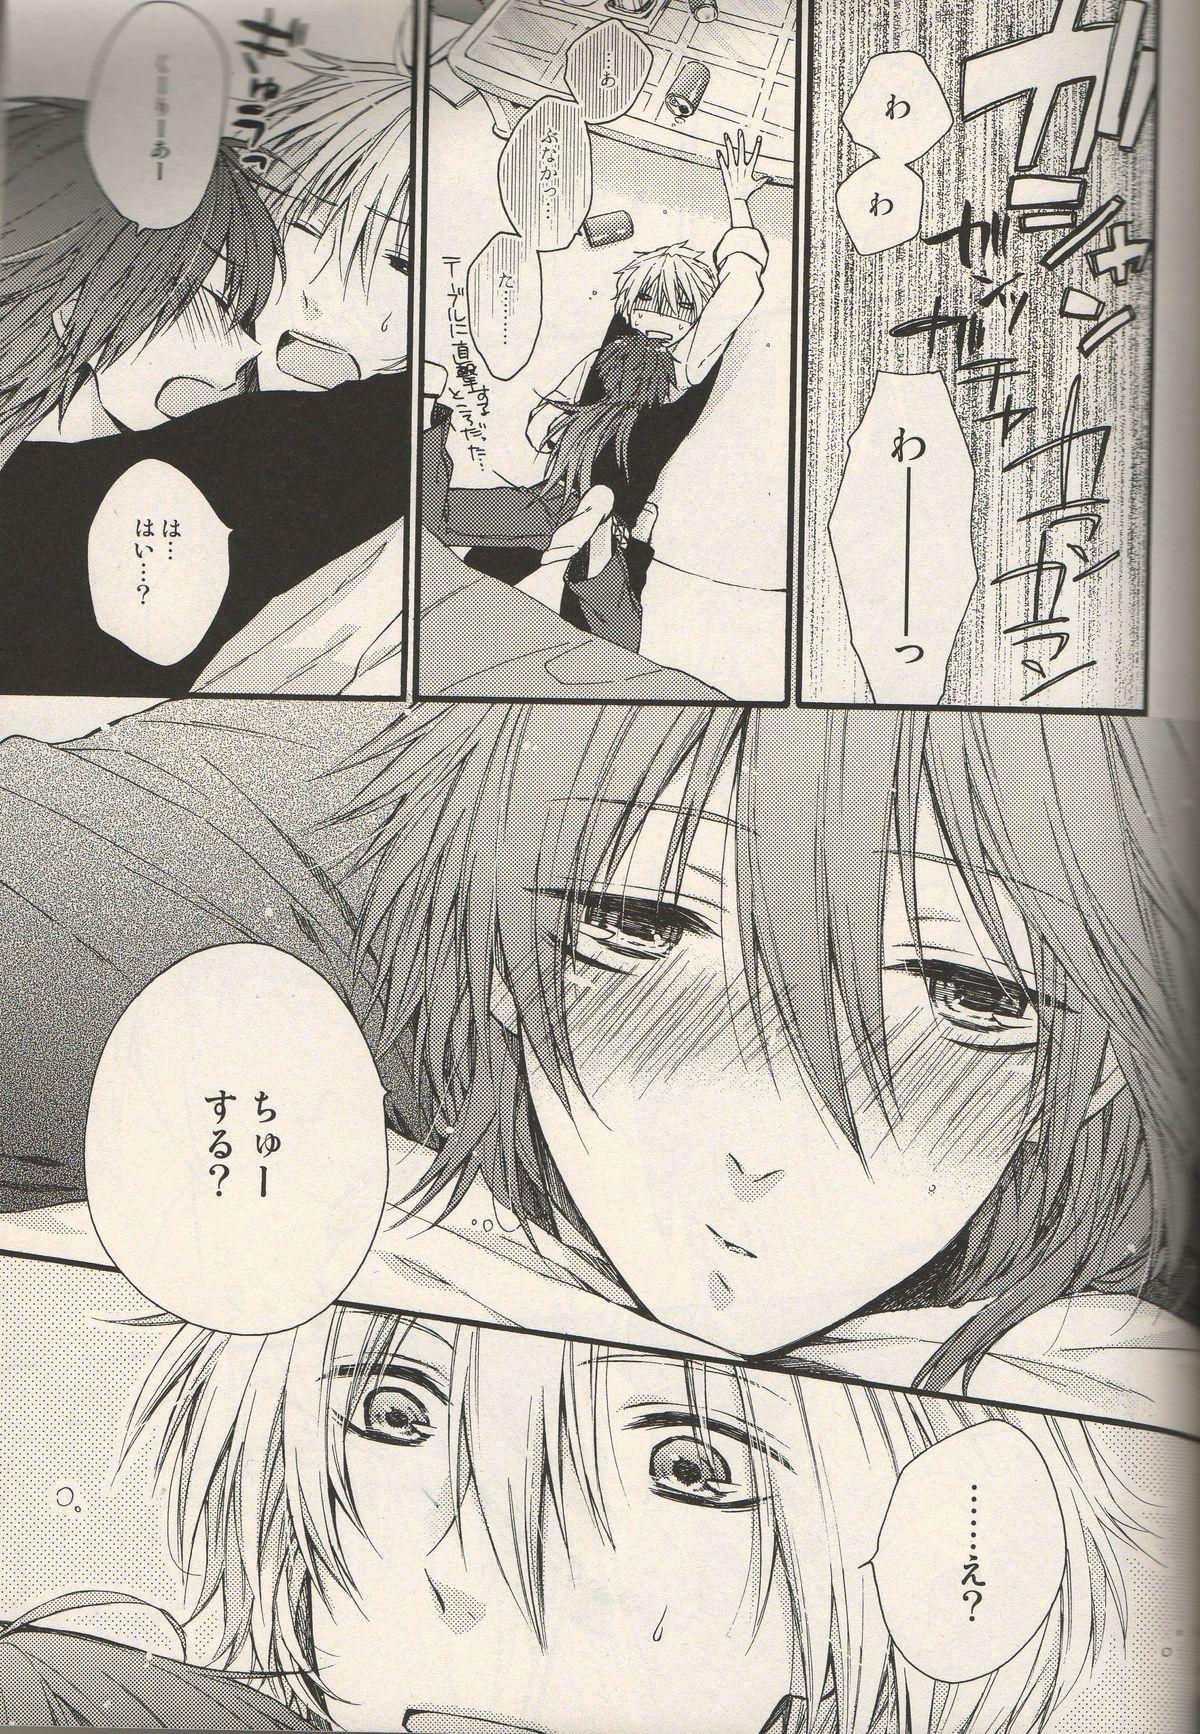 Czech The Story About You - Dramatical murder Perfect Body - Page 7